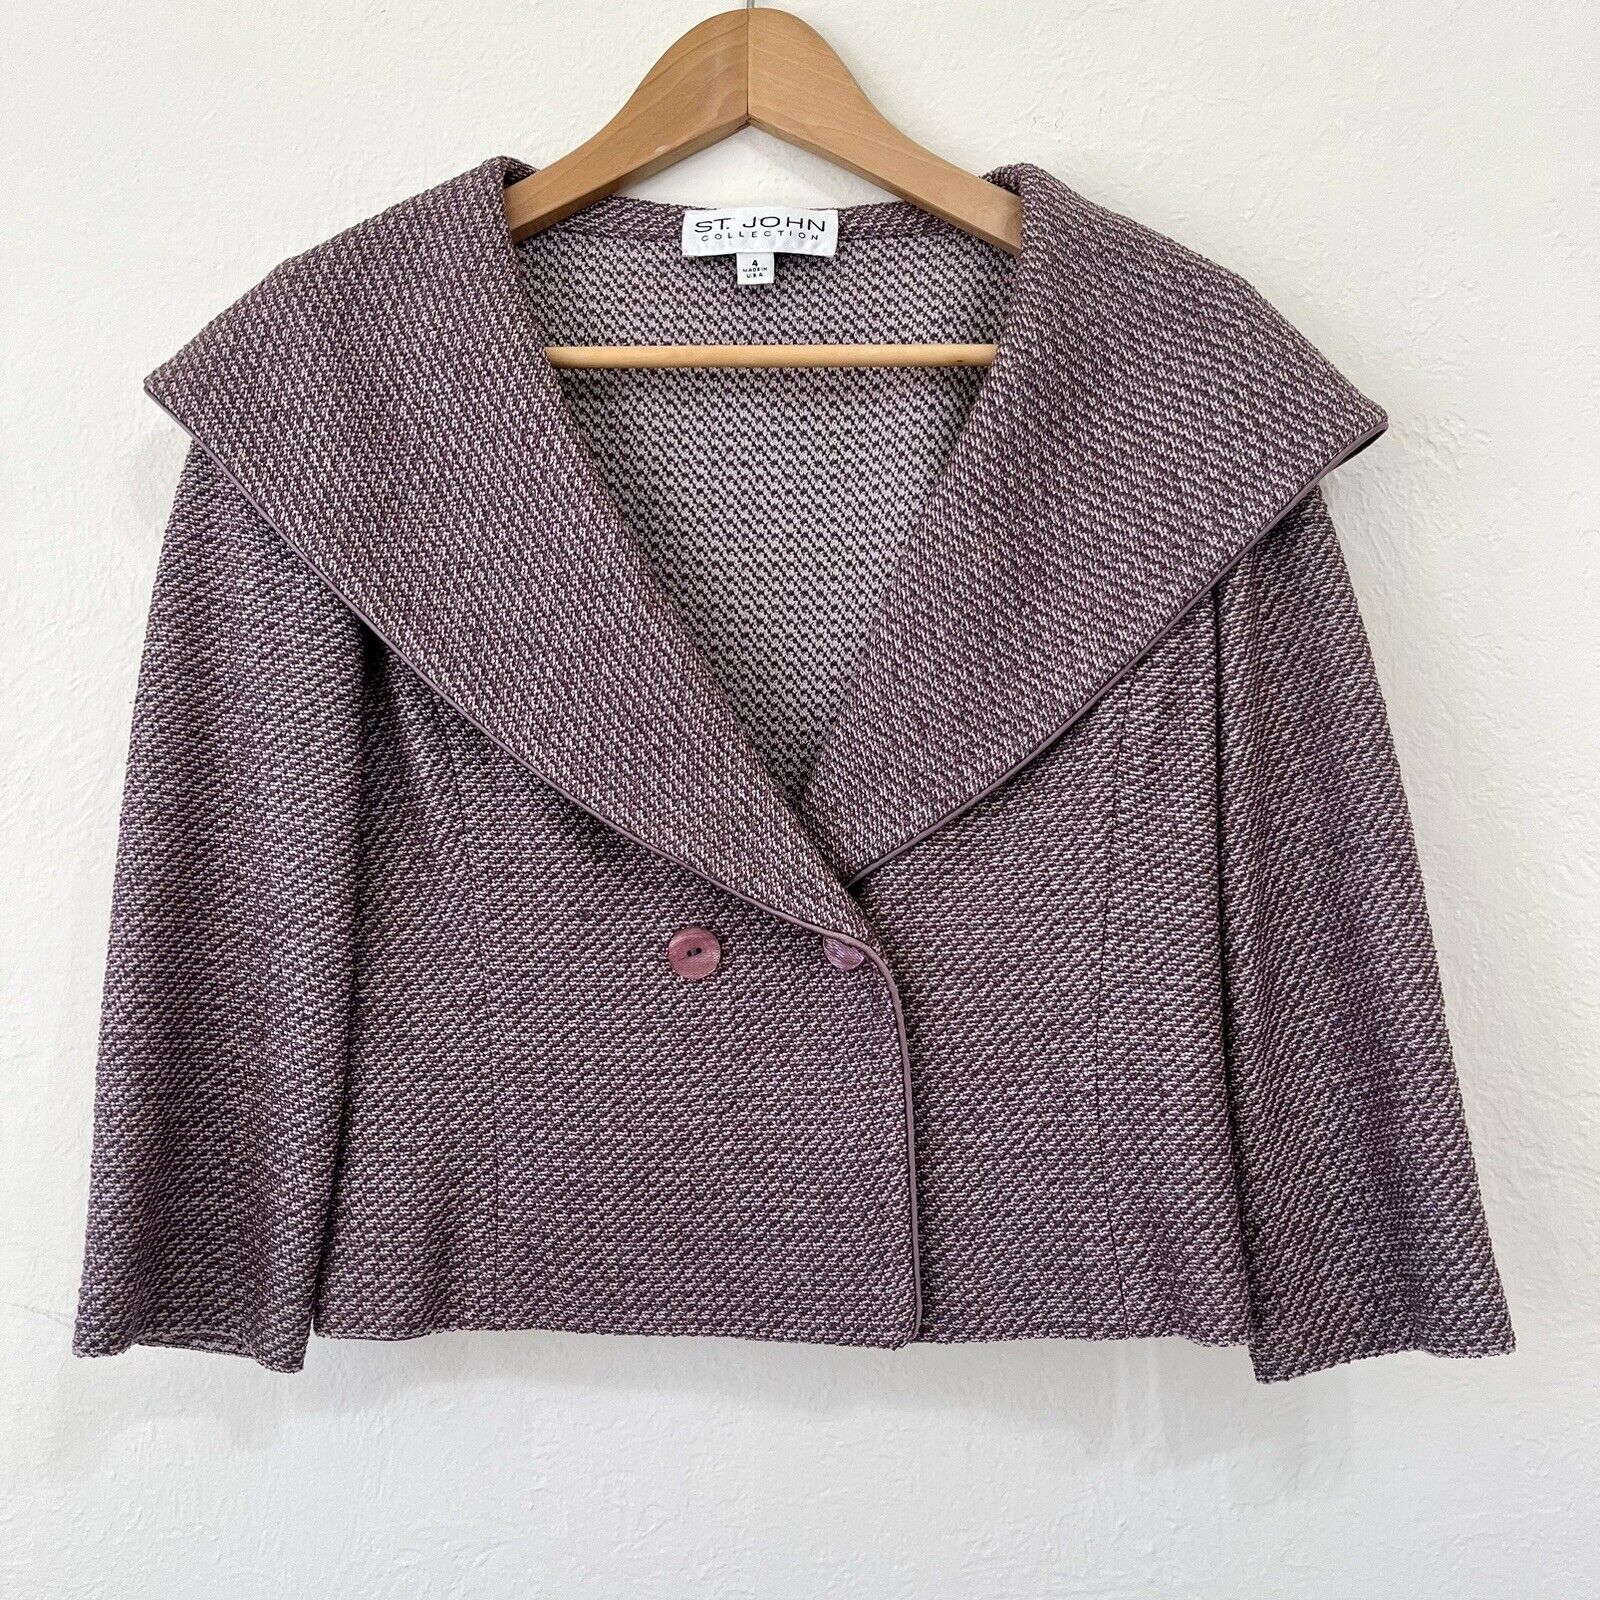 St John Collection Tweed Textured Purple Lavender Cropped Jacket Size 4